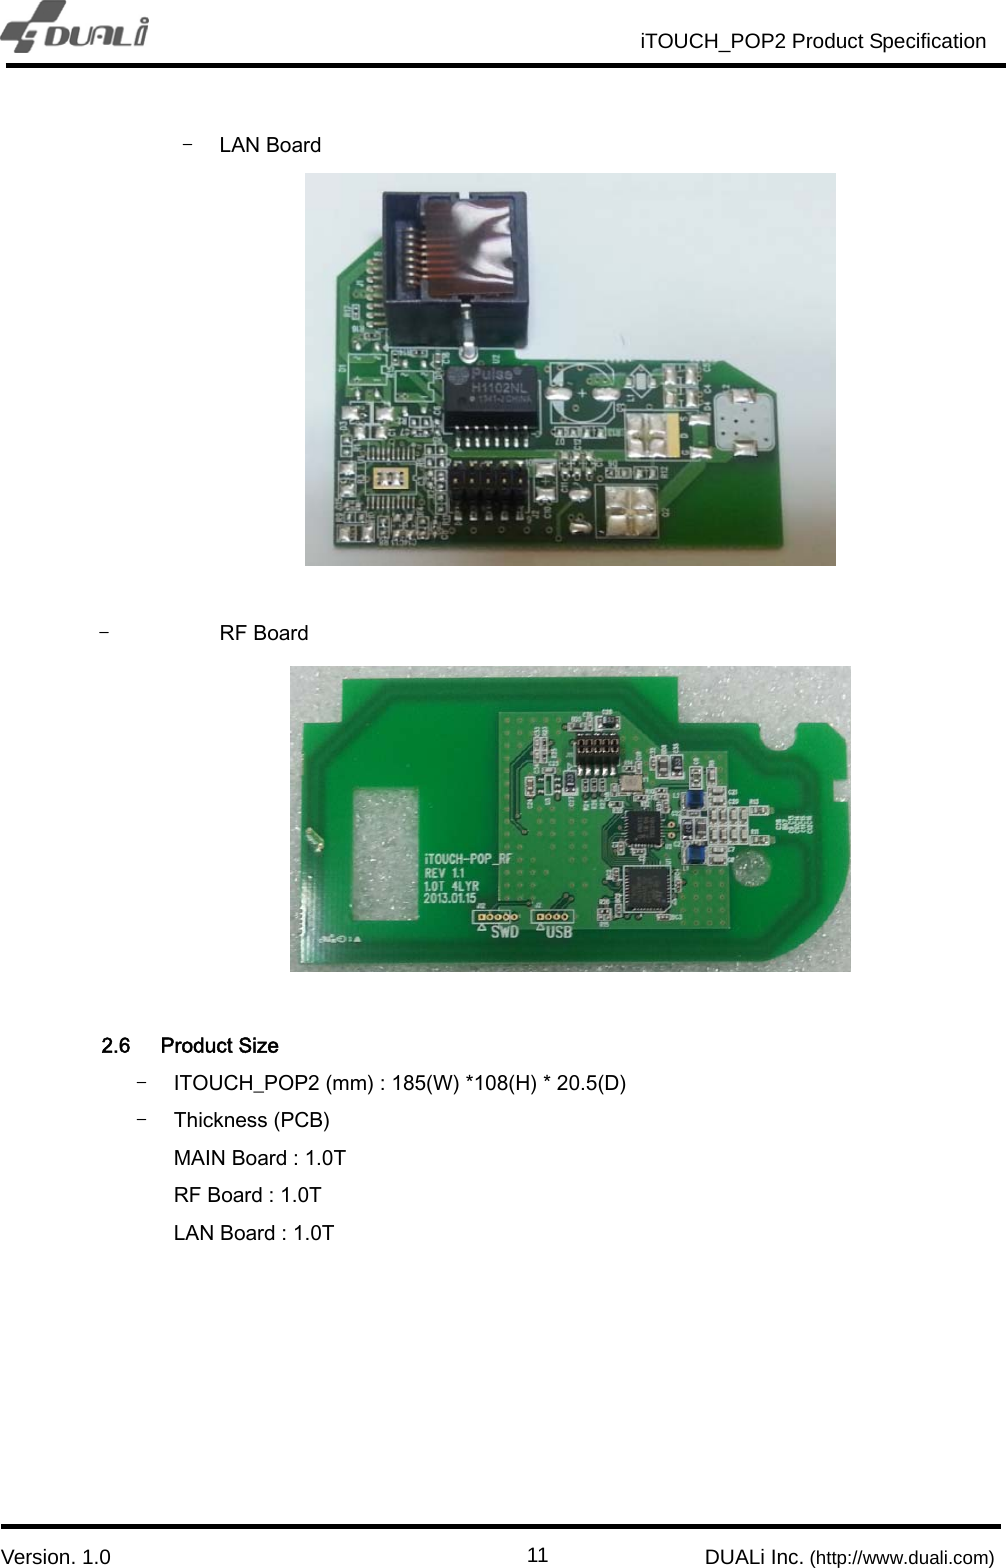                                                          iTOUCH_POP2 Product Specification                          `  Version. 1.0                                                         DUALi Inc. (http://www.duali.com)  11- LAN Board   - RF Board   2.6 Product Size - ITOUCH_POP2 (mm) : 185(W) *108(H) * 20.5(D) - Thickness (PCB)   MAIN Board : 1.0T RF Board : 1.0T LAN Board : 1.0T      